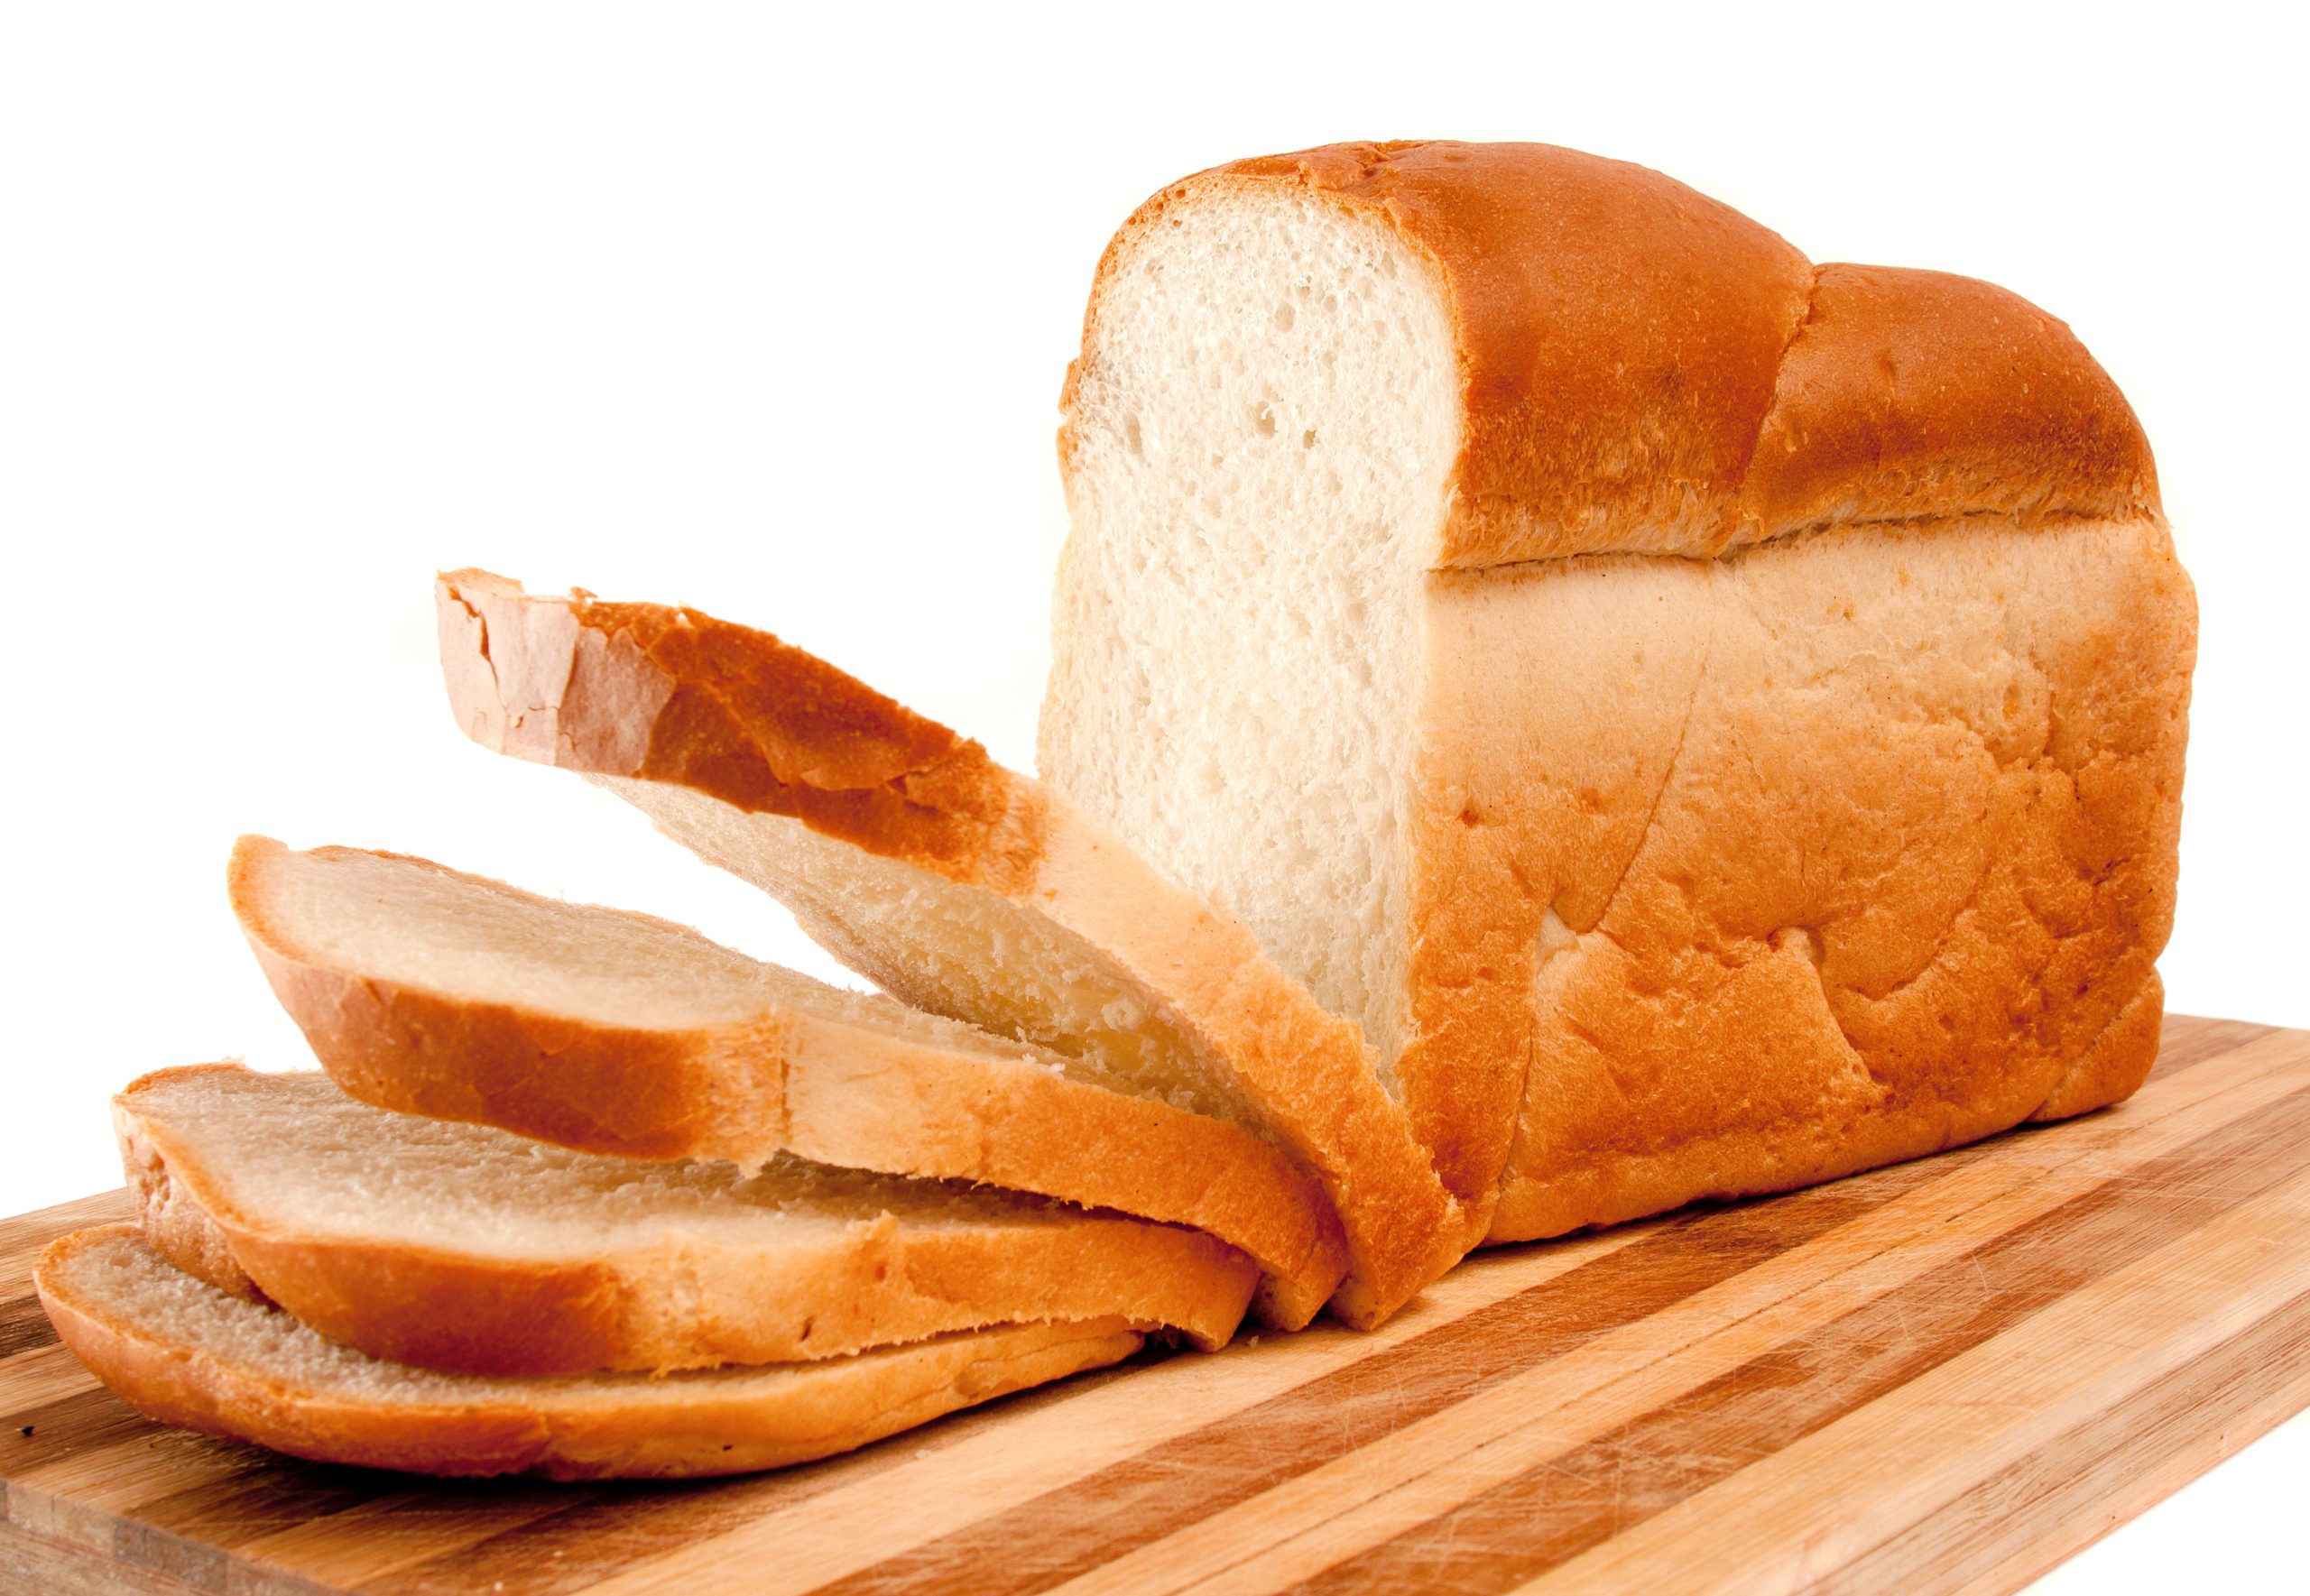 Average bread prices increase by almost 30% in 12 months